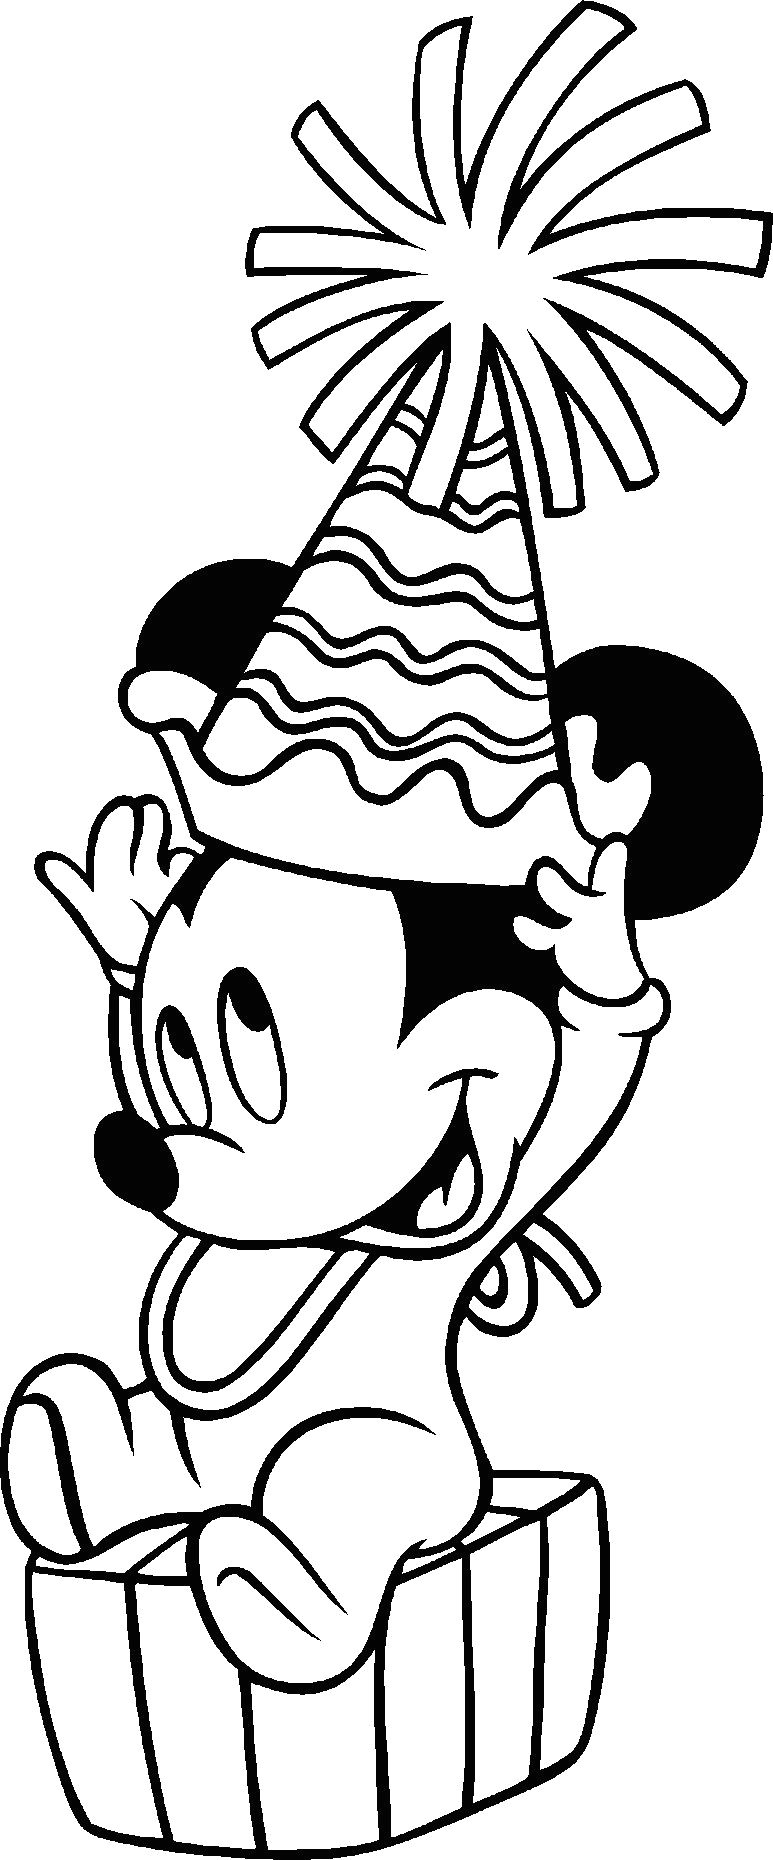 Drawing Ideas Mickey Mouse Free Printable Mickey Mouse Coloring Pages for Kids October Bday